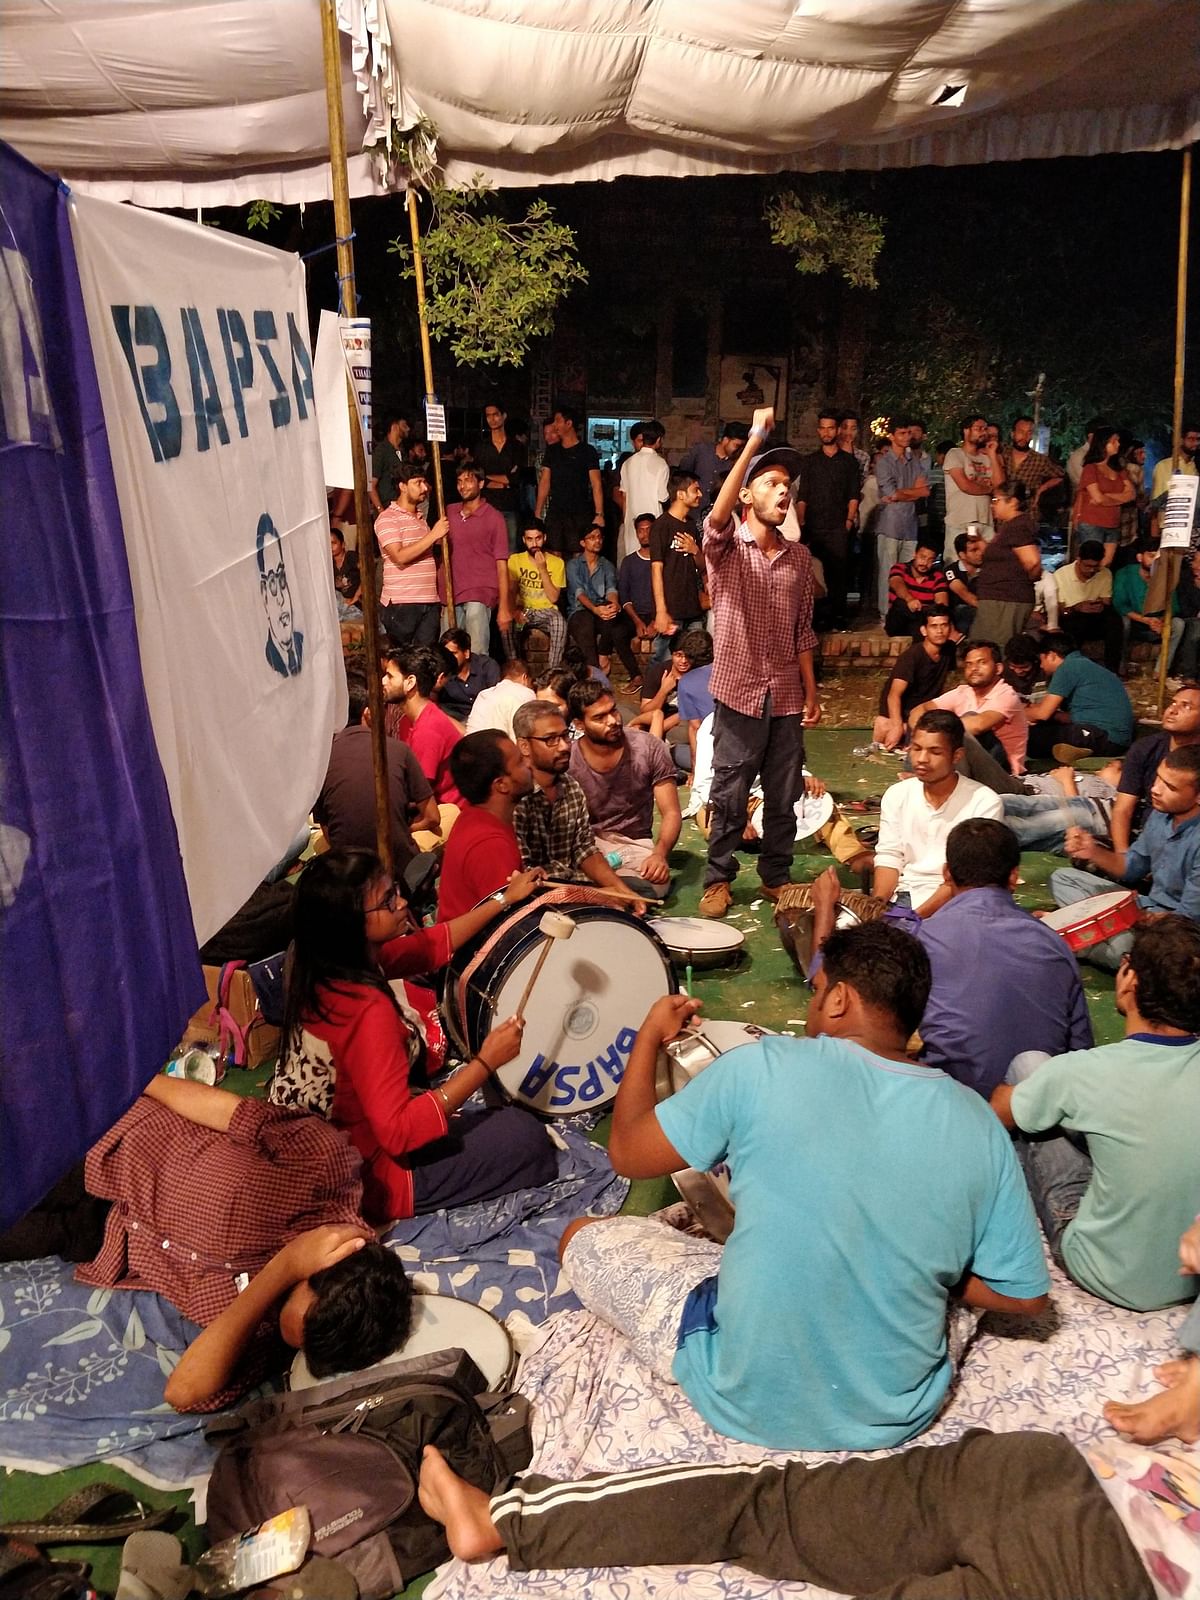 Violence, allegations and slogans – the JNUSU polls have all the ingredients of a political potboiler in the making.